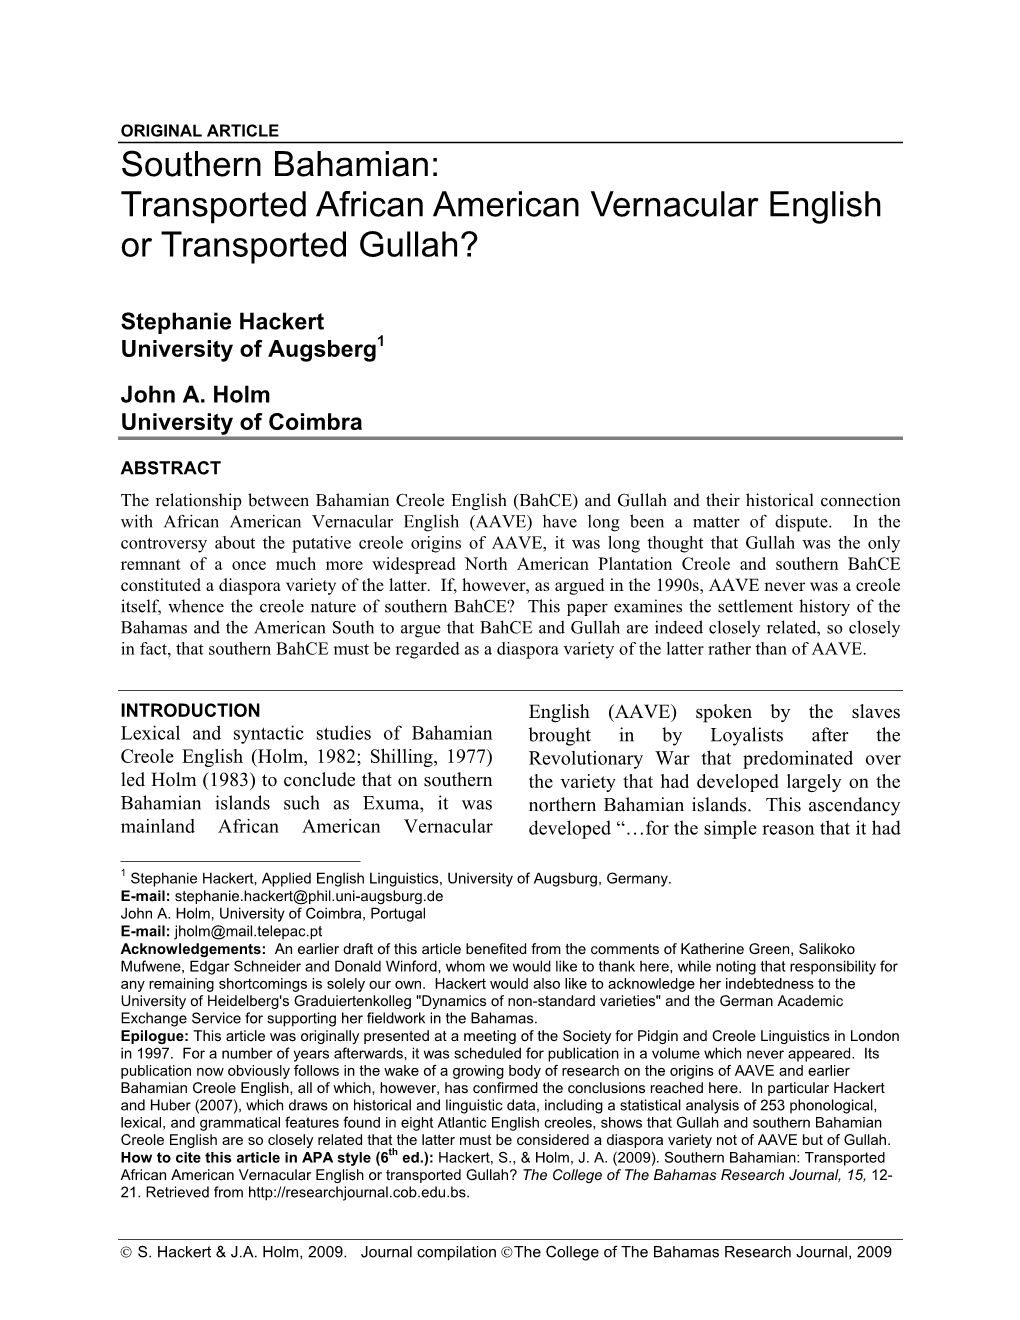 Southern Bahamian: Transported African American Vernacular English Or Transported Gullah?